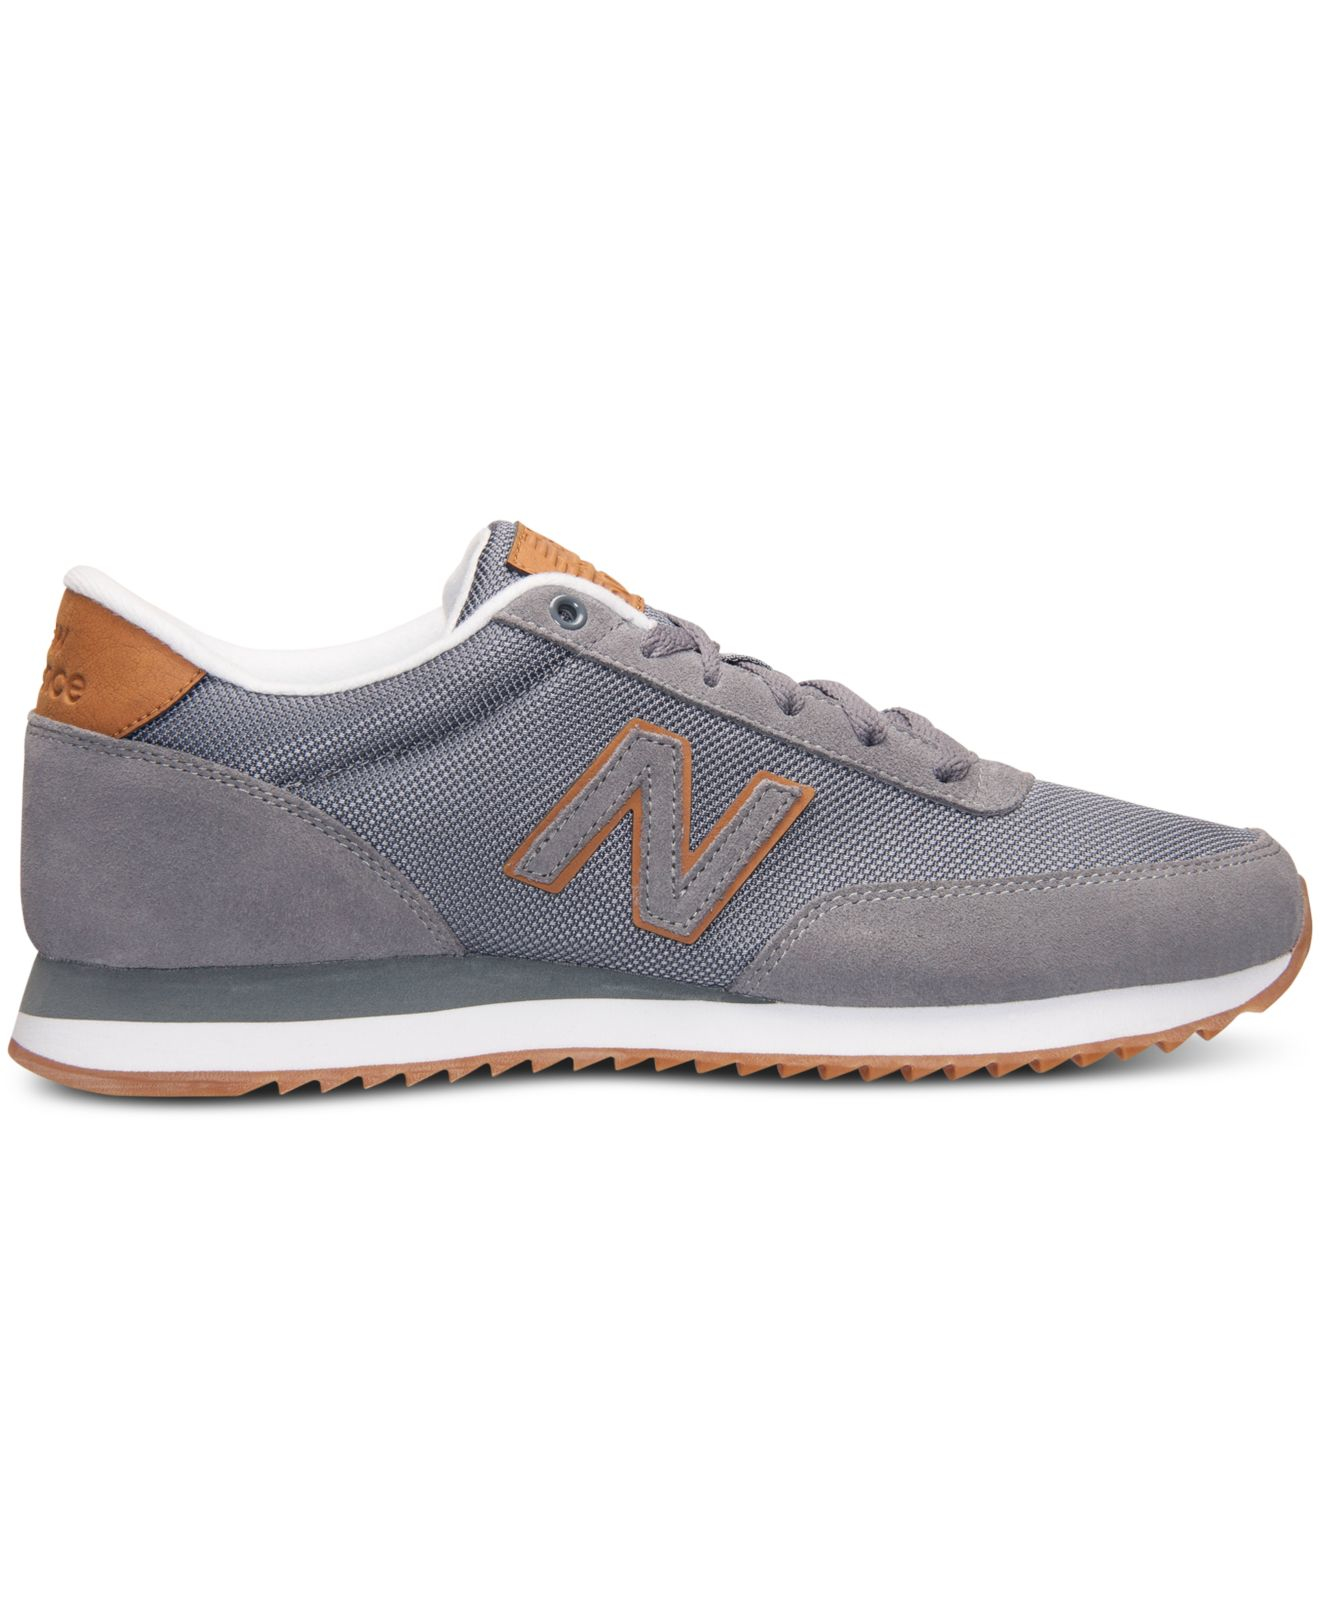 Lyst - New Balance Men's 501 Ripple Sole Casual Sneakers From Finish